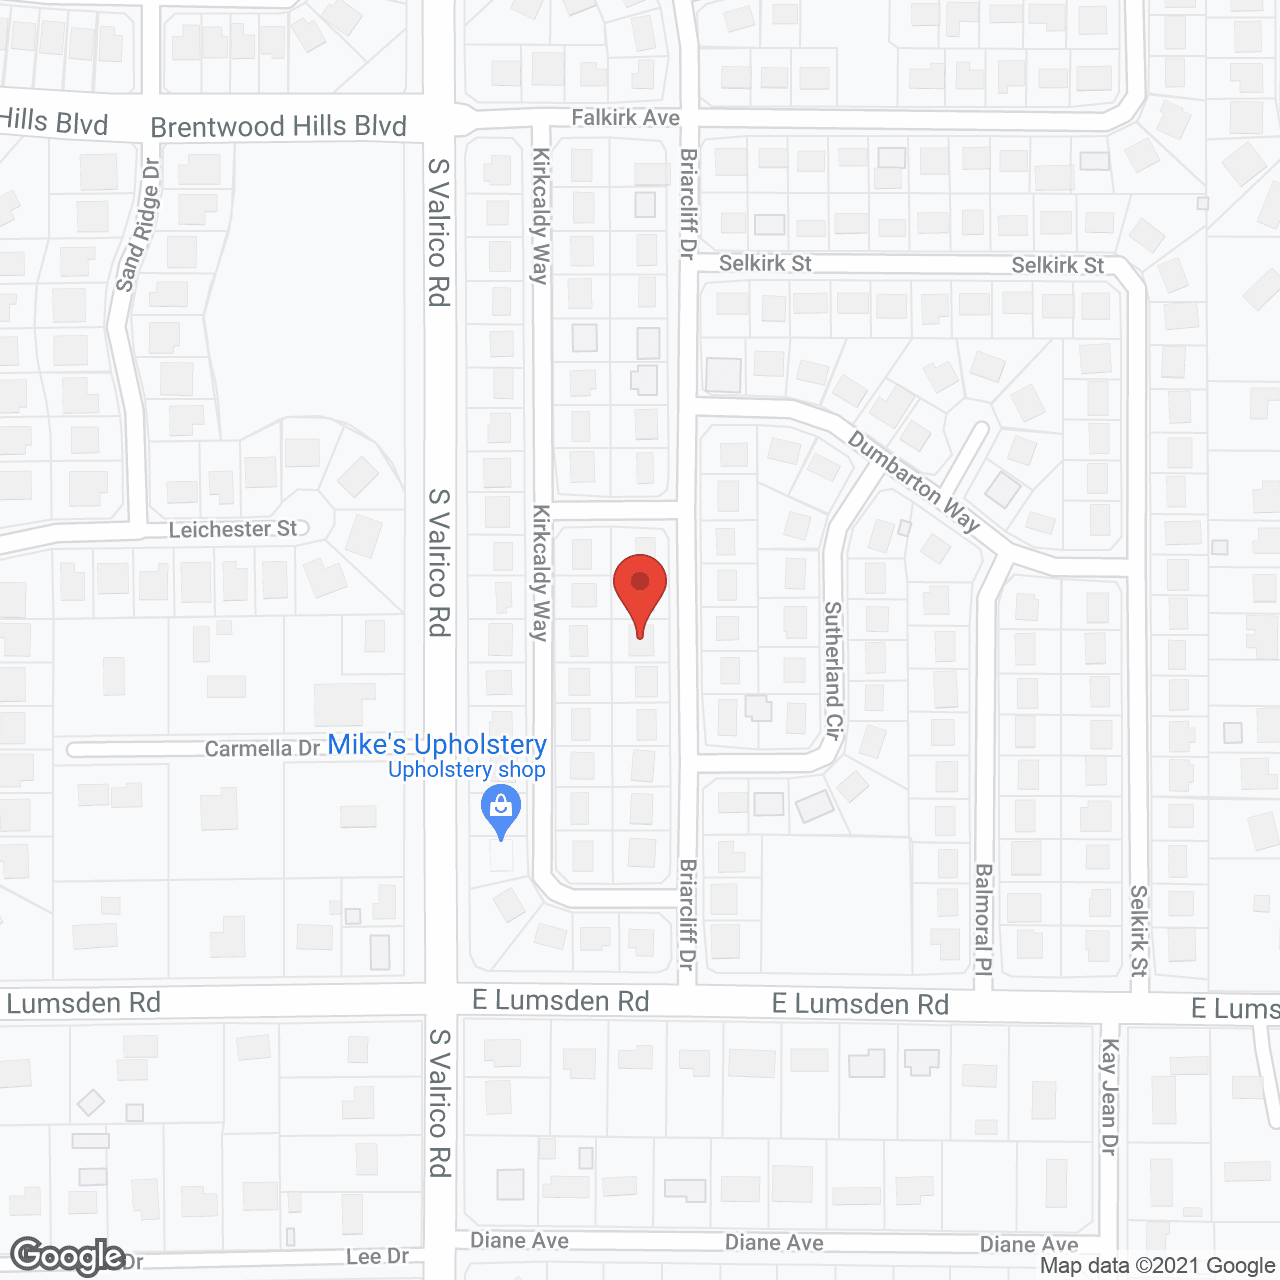 Benrac Home Assisted Living Facility in google map